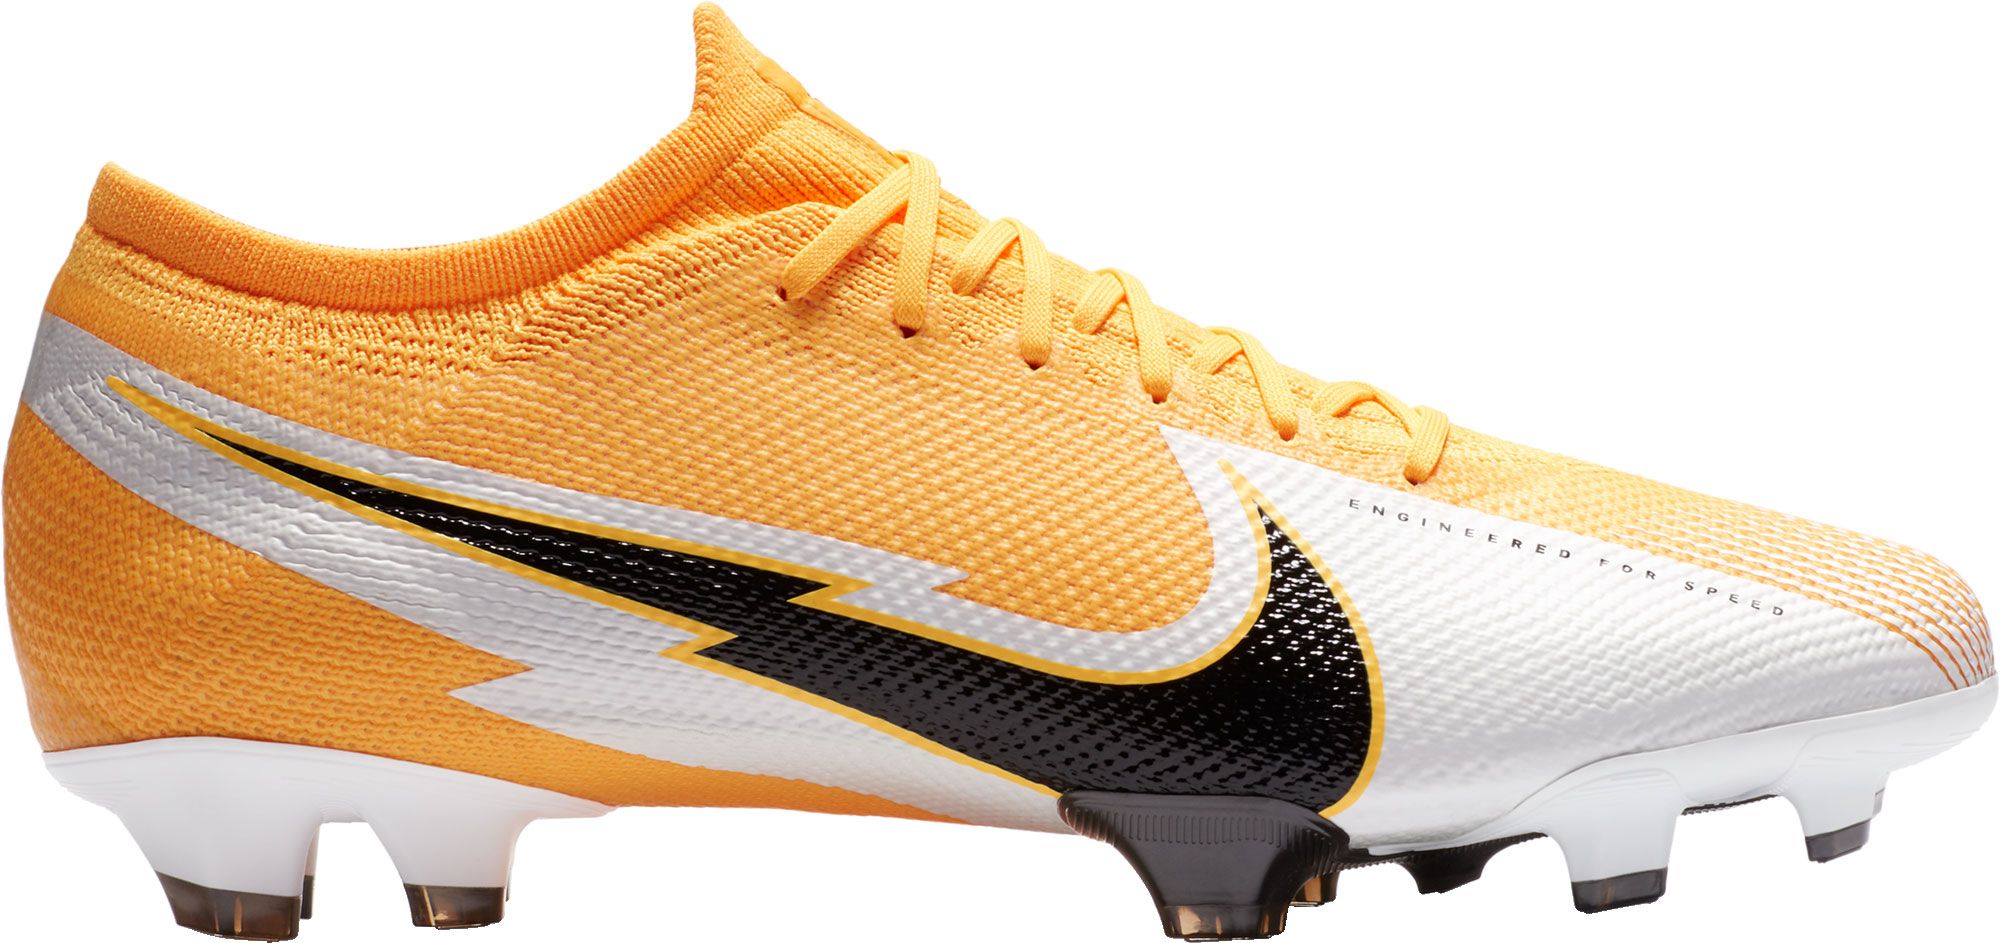 nike black and yellow soccer cleats